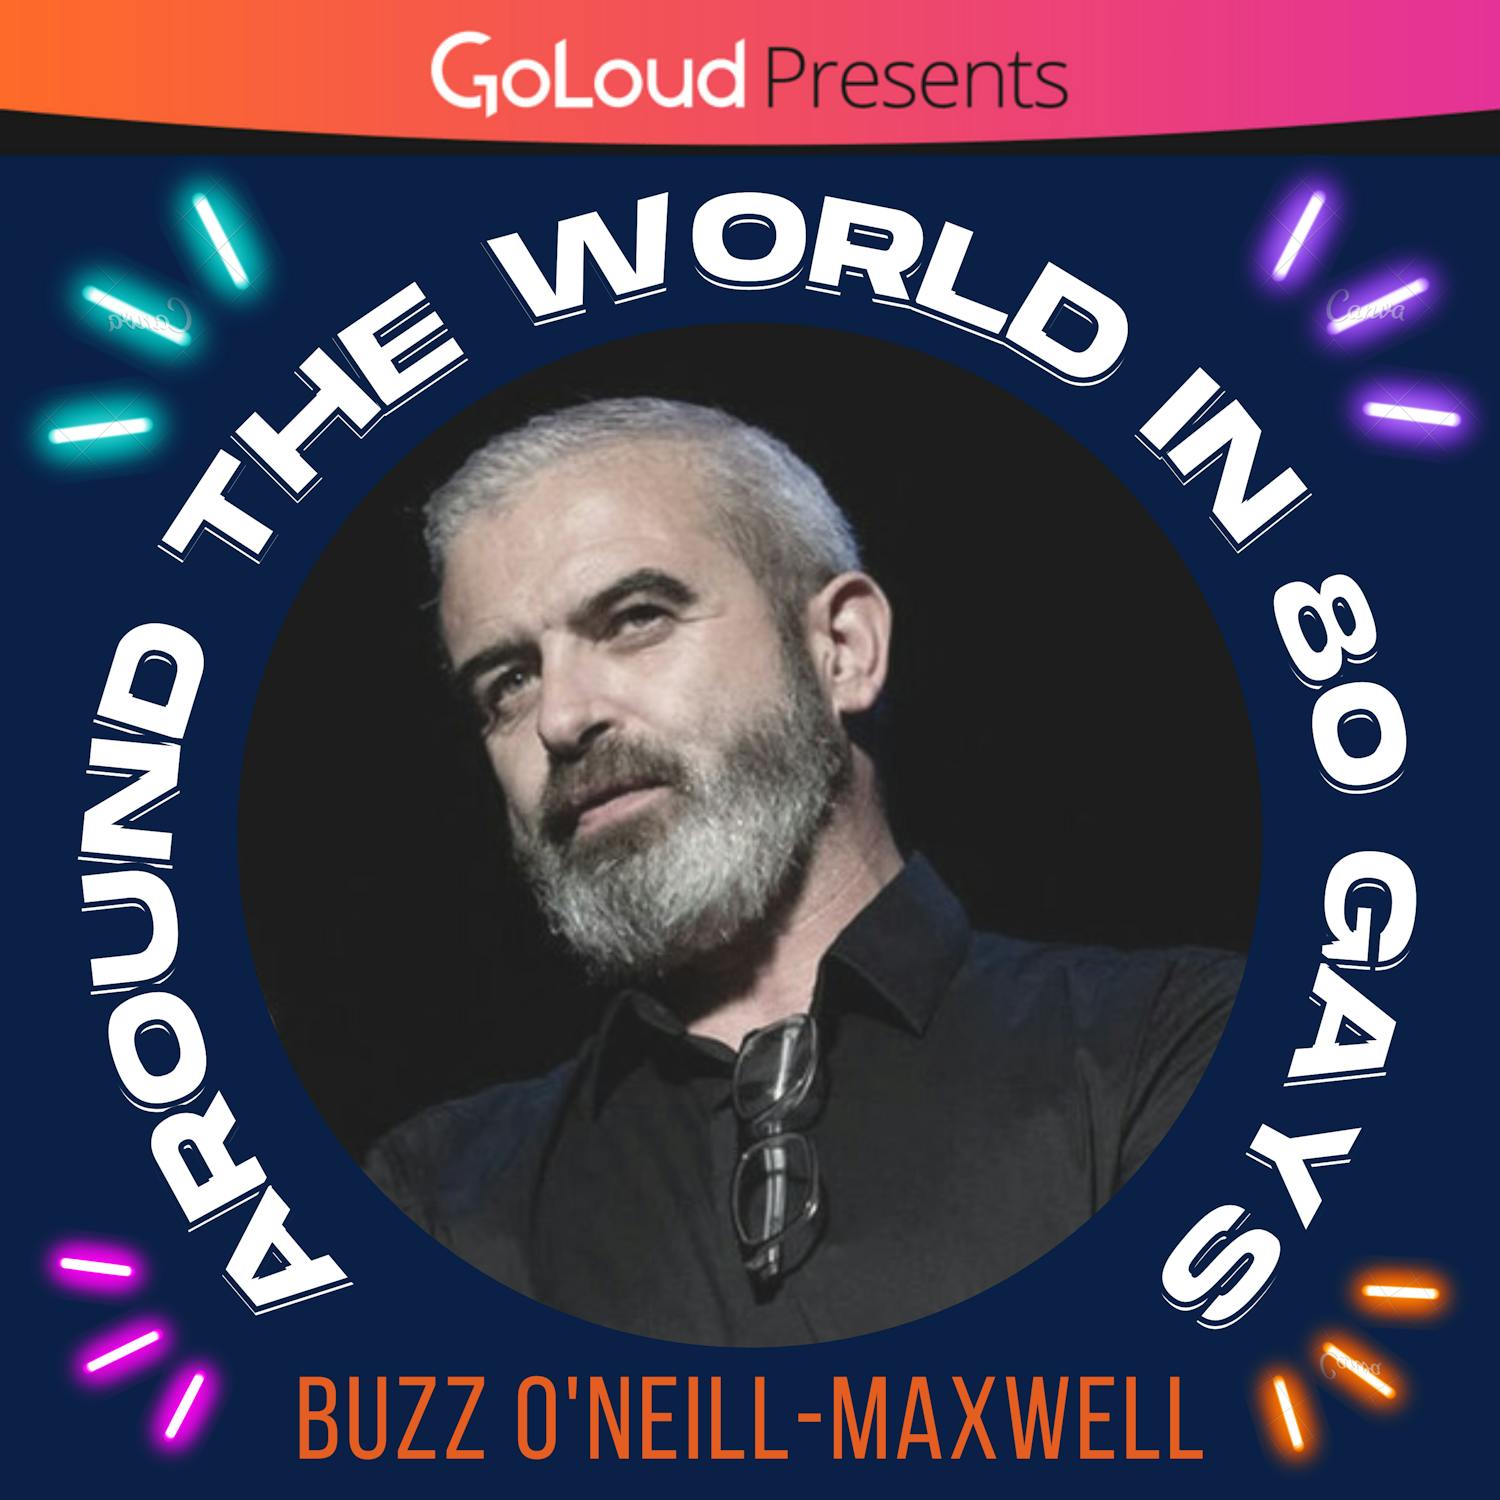 Around the World in 80 Gays meets Buzz O'Neill Maxwell